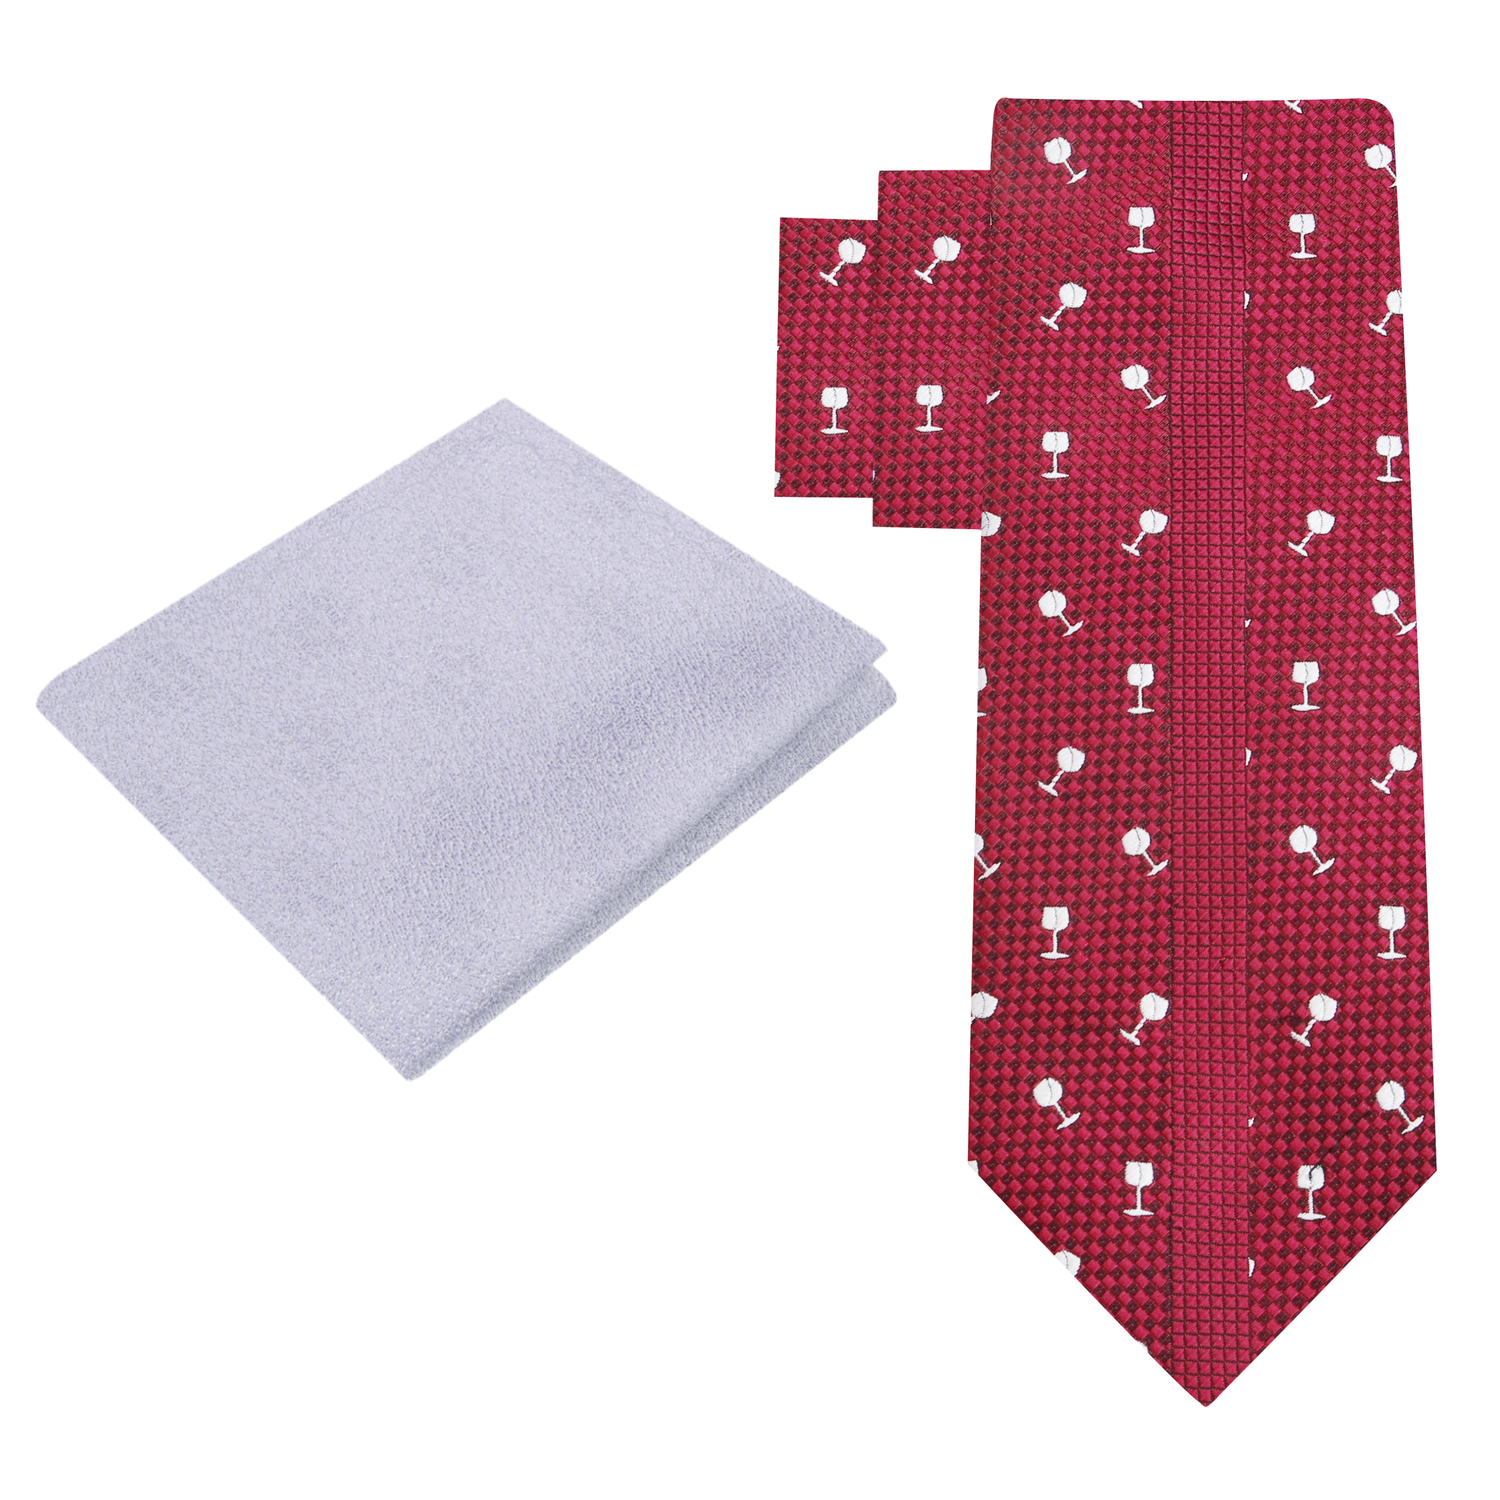 Alt View: Deep Red with Light Grey Wine Glasses Necktie and Silver Pocket Square